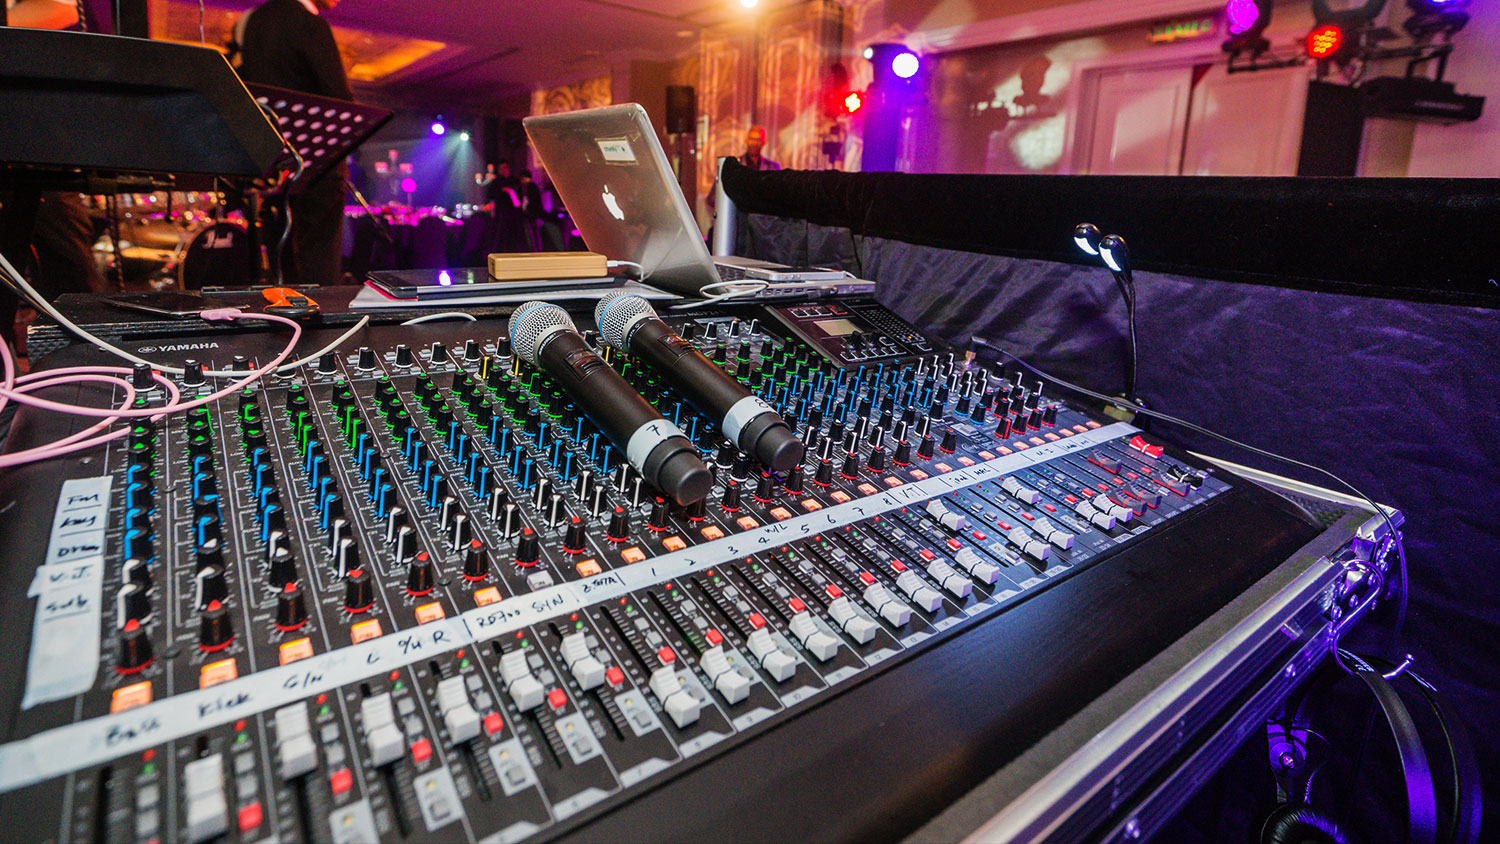 We provide sound mixing board rental services and comprehensive audio-visual rental services for events. We own and offer a full suite of audio-visual equipment for hire including audio equipment, LED lighting, video projection, LED walls and the professional technicians to operate it to perfection.